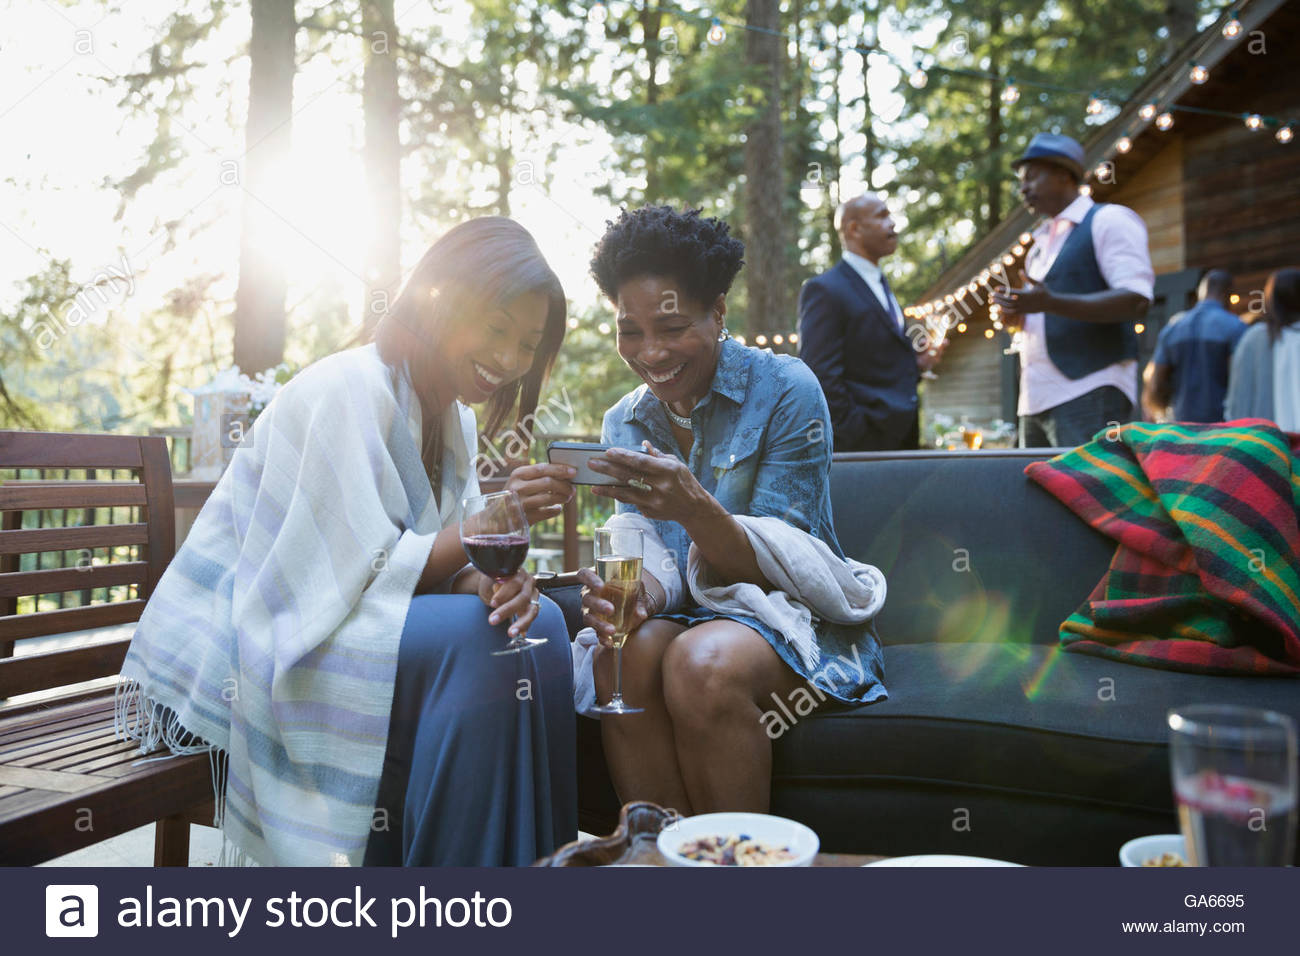 Smiling women drinking wine and looking at cell phone at party on balcony in sunny woods Stock Photo